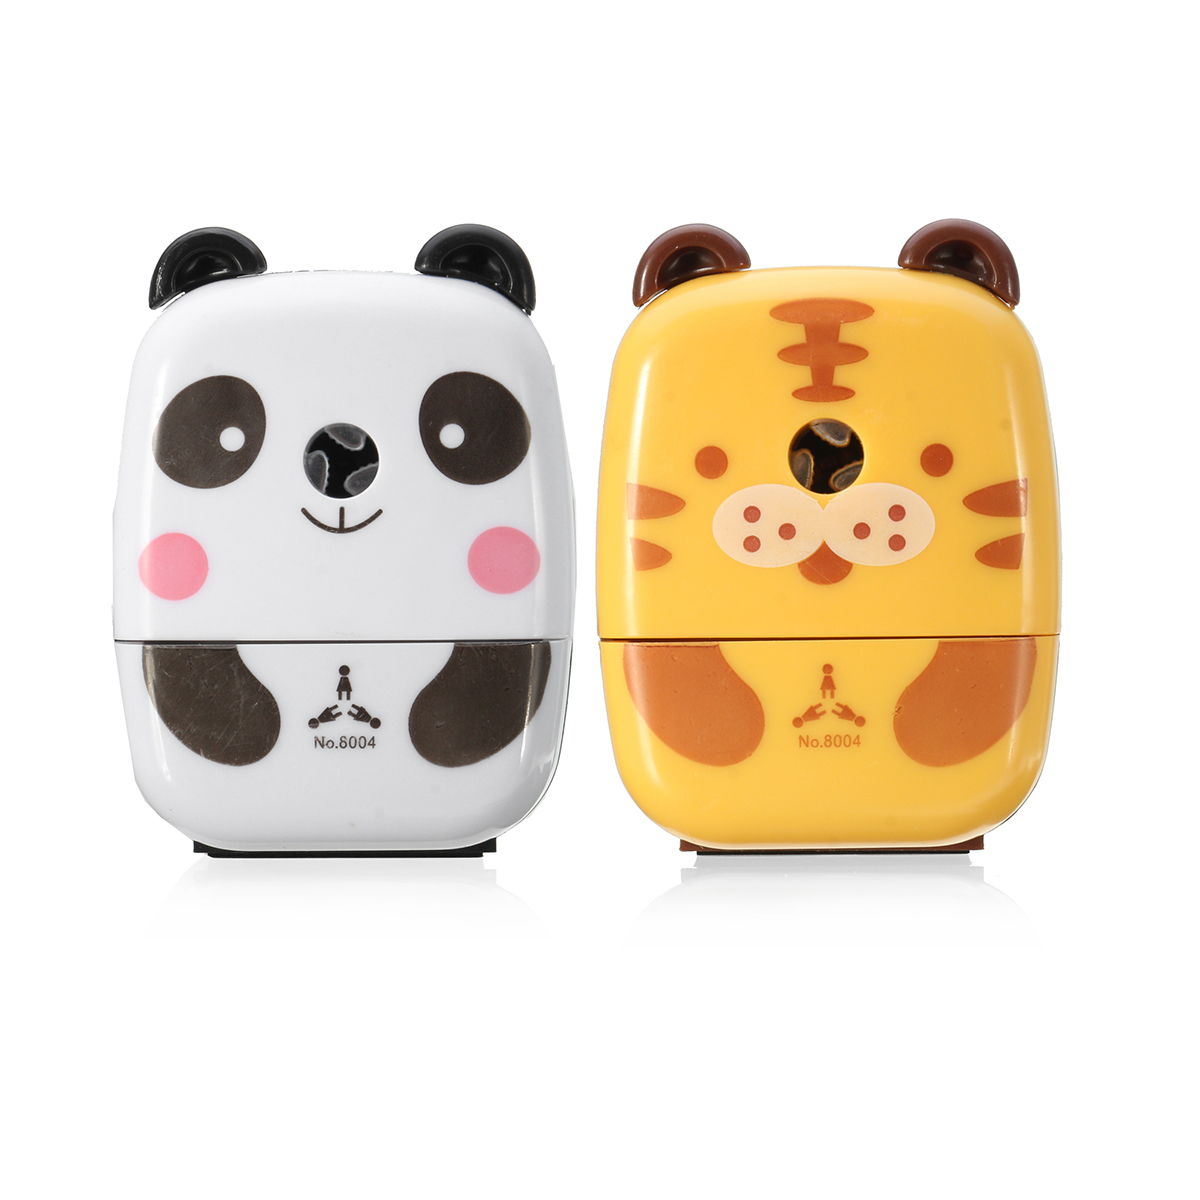 

Practical Tiger Panda Animal Shaped Mini Manual Pencil Sharpener Gifts Office School Students Stationery Supplies